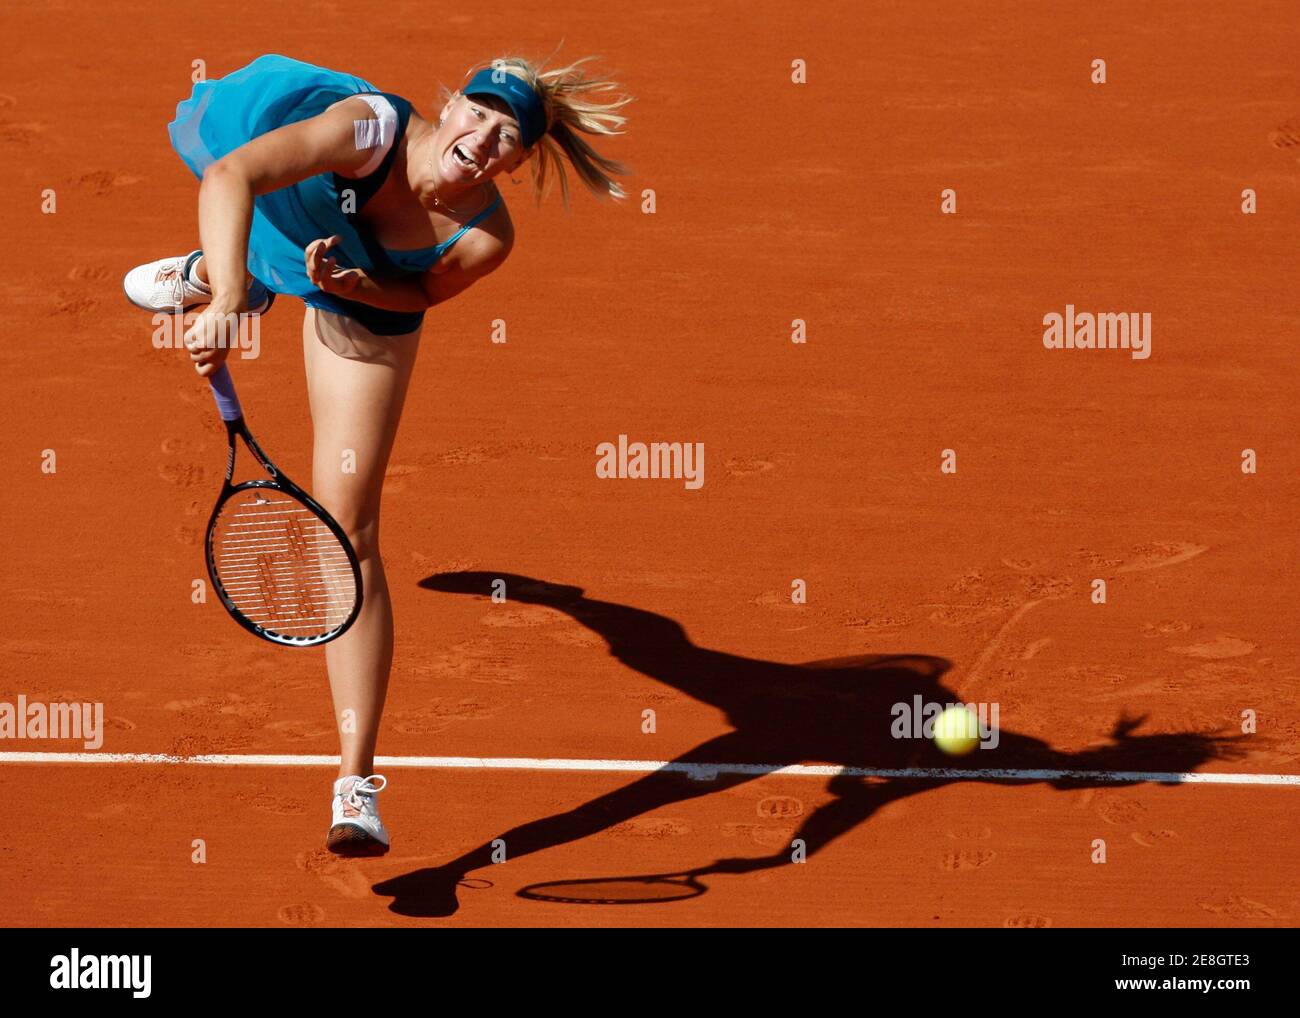 Maria Sharapova of Russia serves to Dominika Cibulkova of Slovakia during  their quarter-final match at the French Open tennis tournament at Roland  Garros in Paris June 2, 2009. REUTERS/Vincent Kessler (FRANCE SPORT